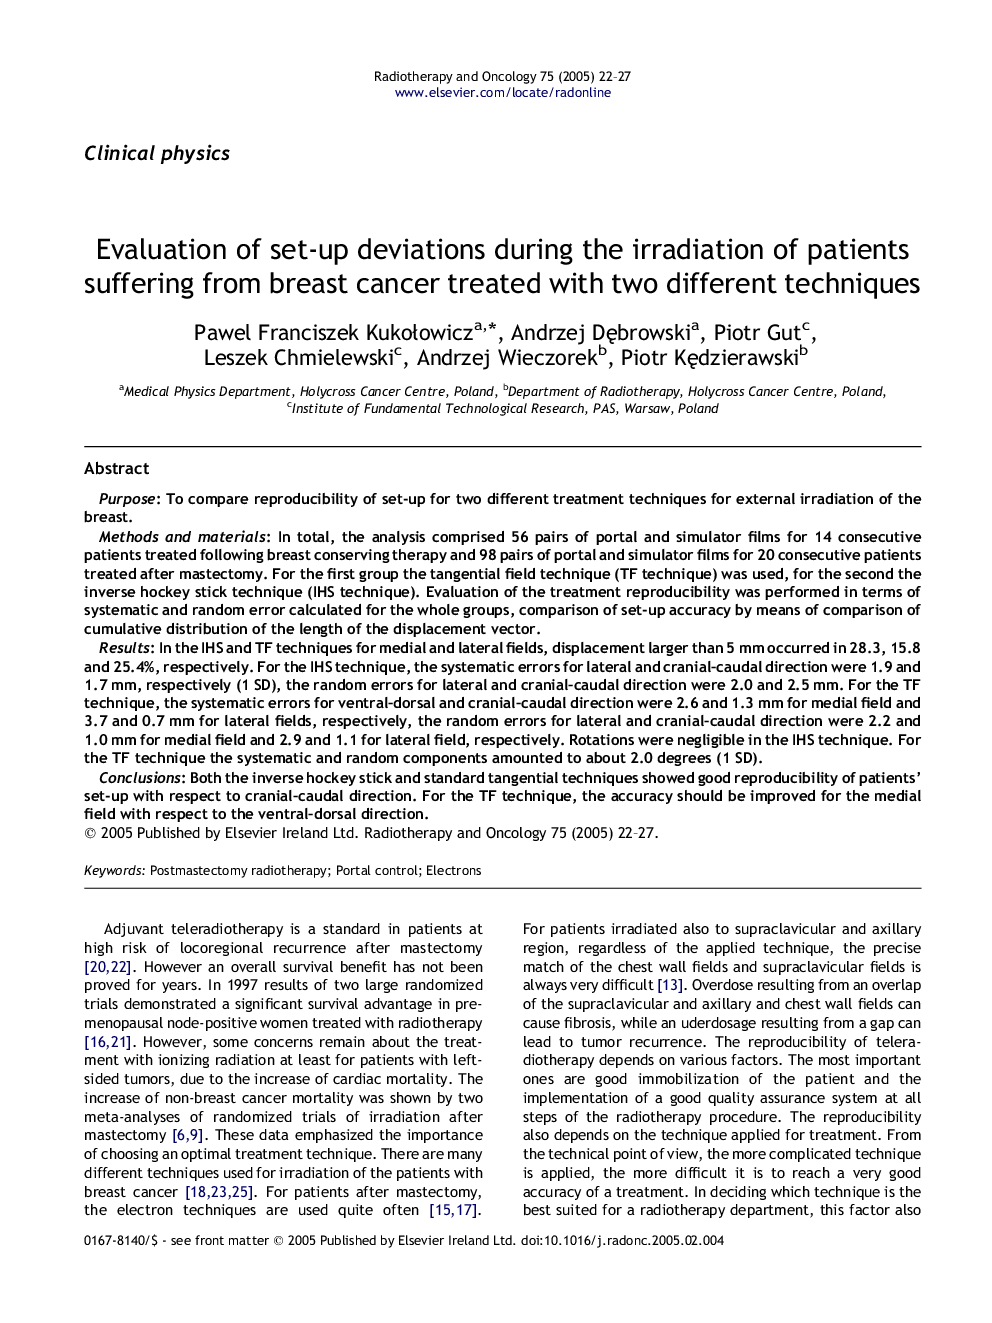 Evaluation of set-up deviations during the irradiation of patients suffering from breast cancer treated with two different techniques